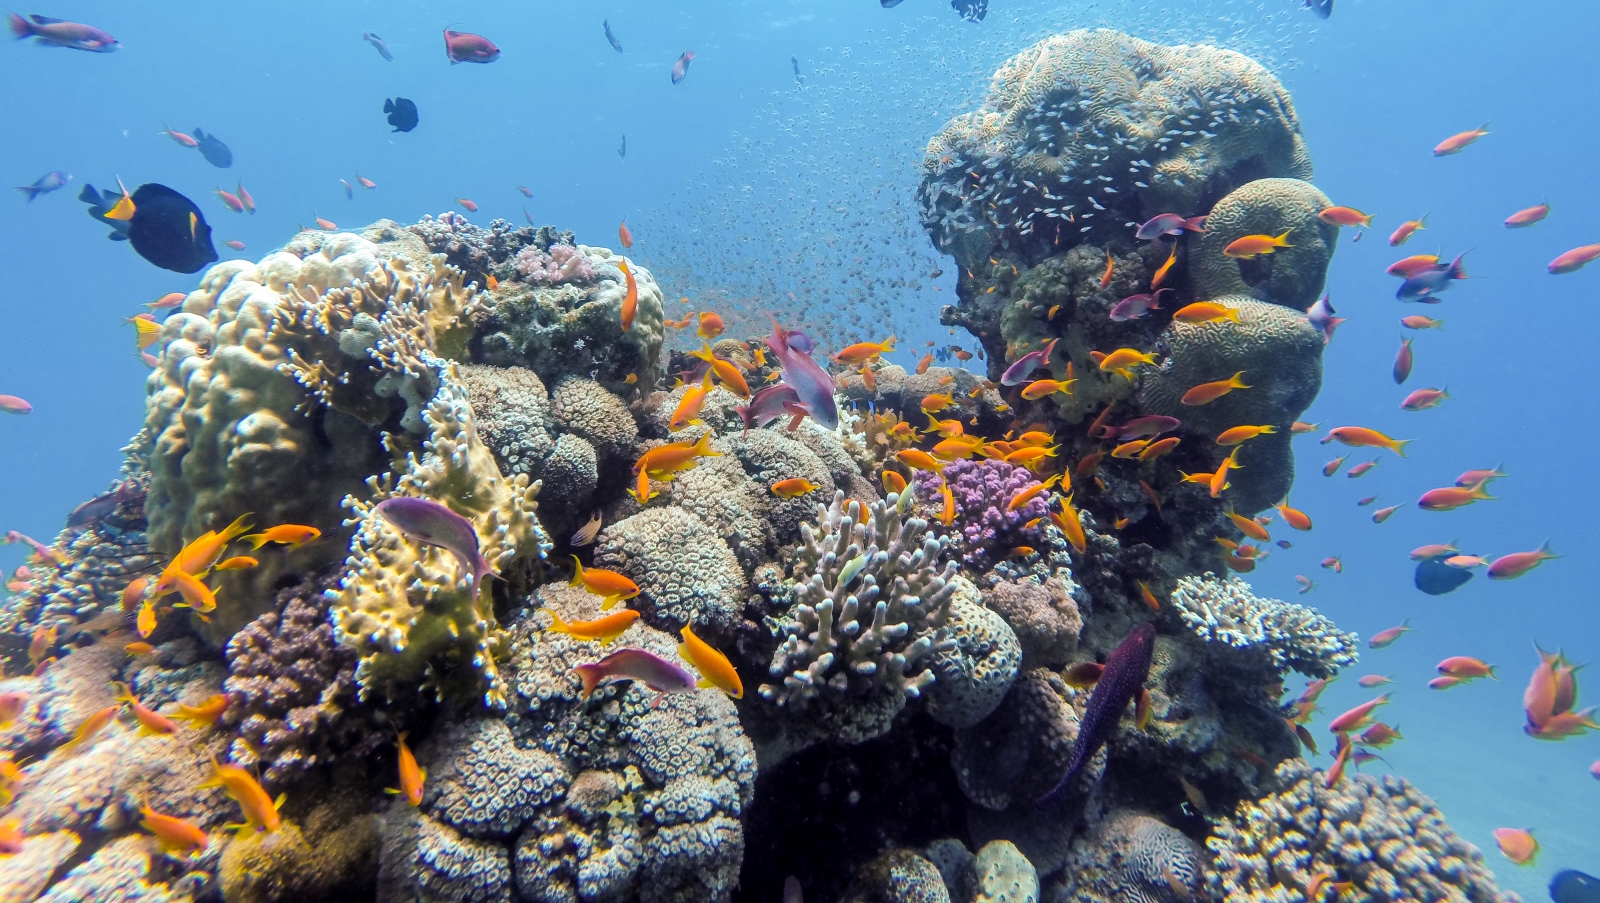 A coral reef in the Red Sea's Gulf of Aqaba. Photo by Yevgeni Chernishev via shutterstock.com